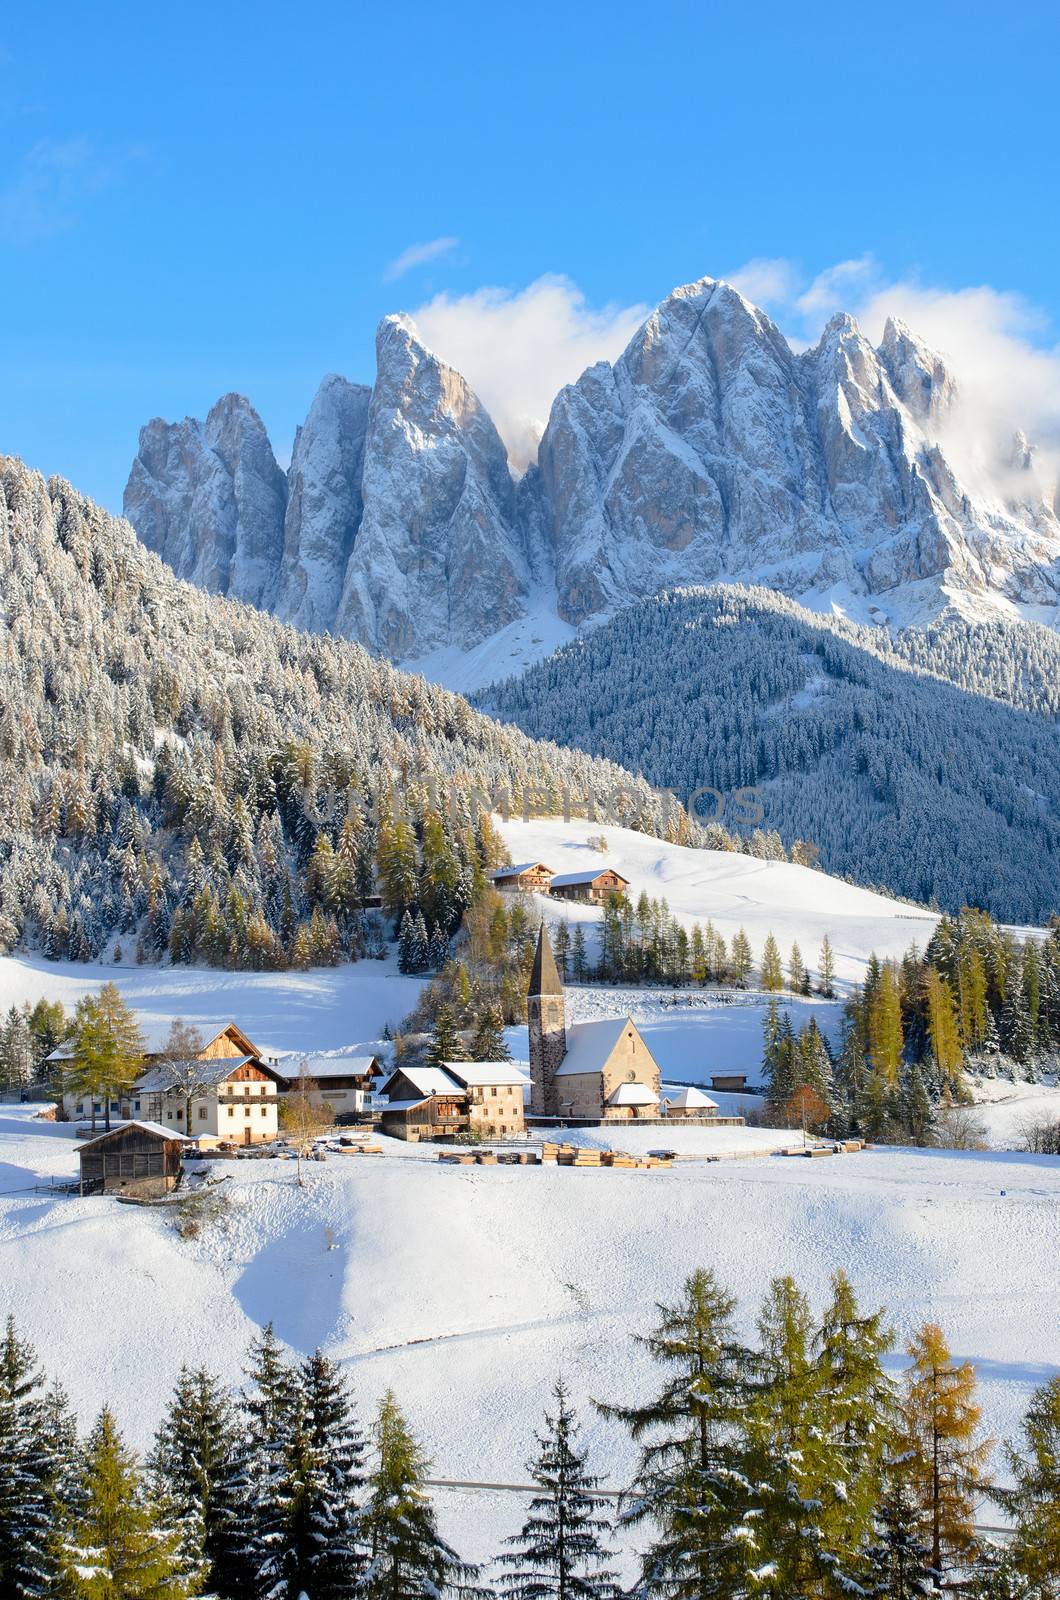 St. Magdalena or Santa Maddalena with its characteristic church in front of the Geisler, Odle, dolomites mountain peaks in the Val di Funes (Villnosstal) in South Tyrol in Italy in winter.